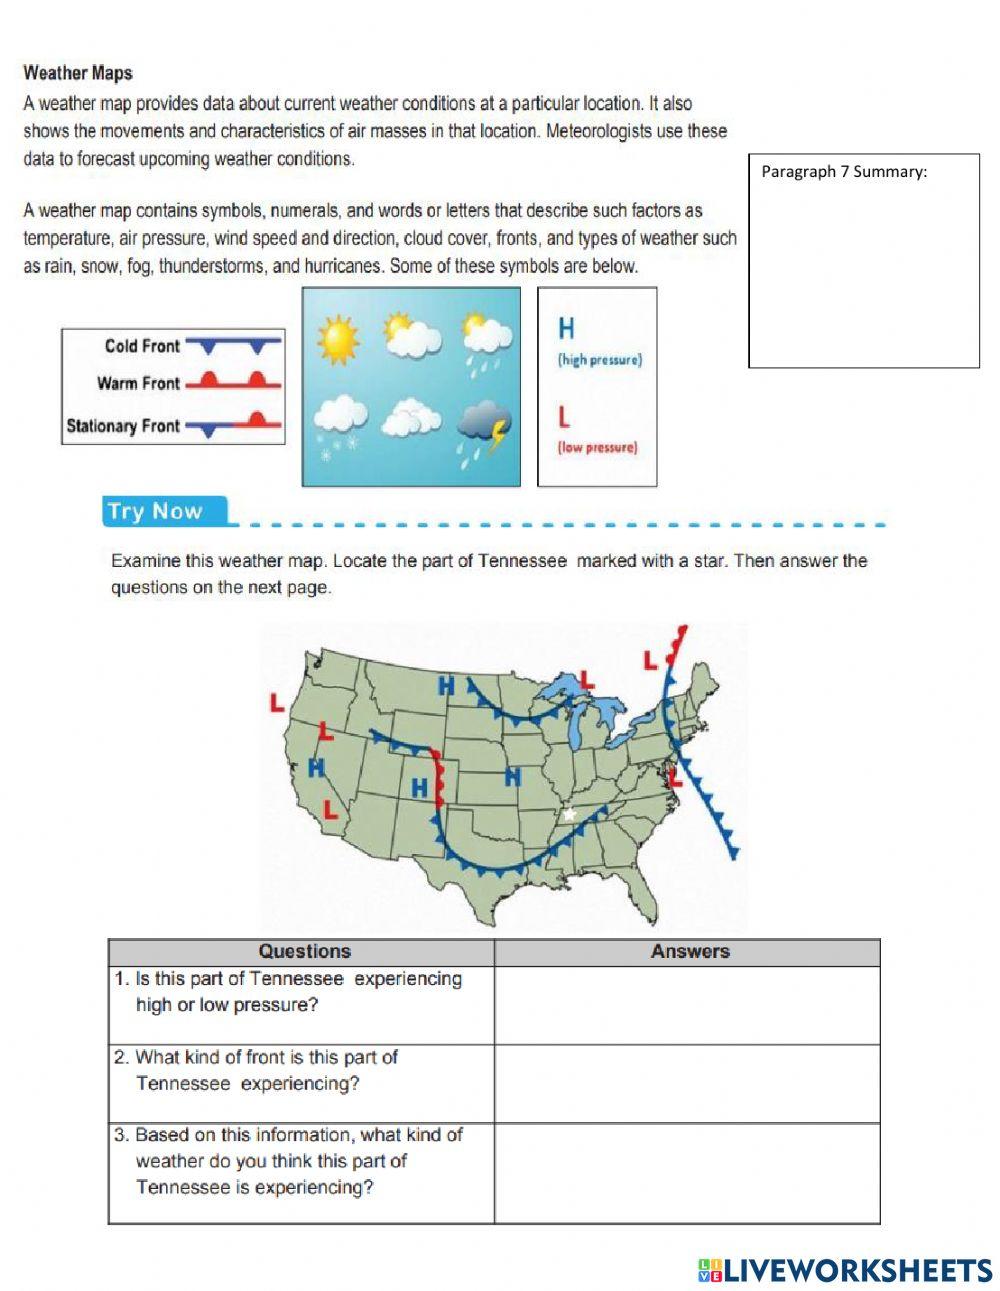 March 24 Predicting Weather Stations 5-6